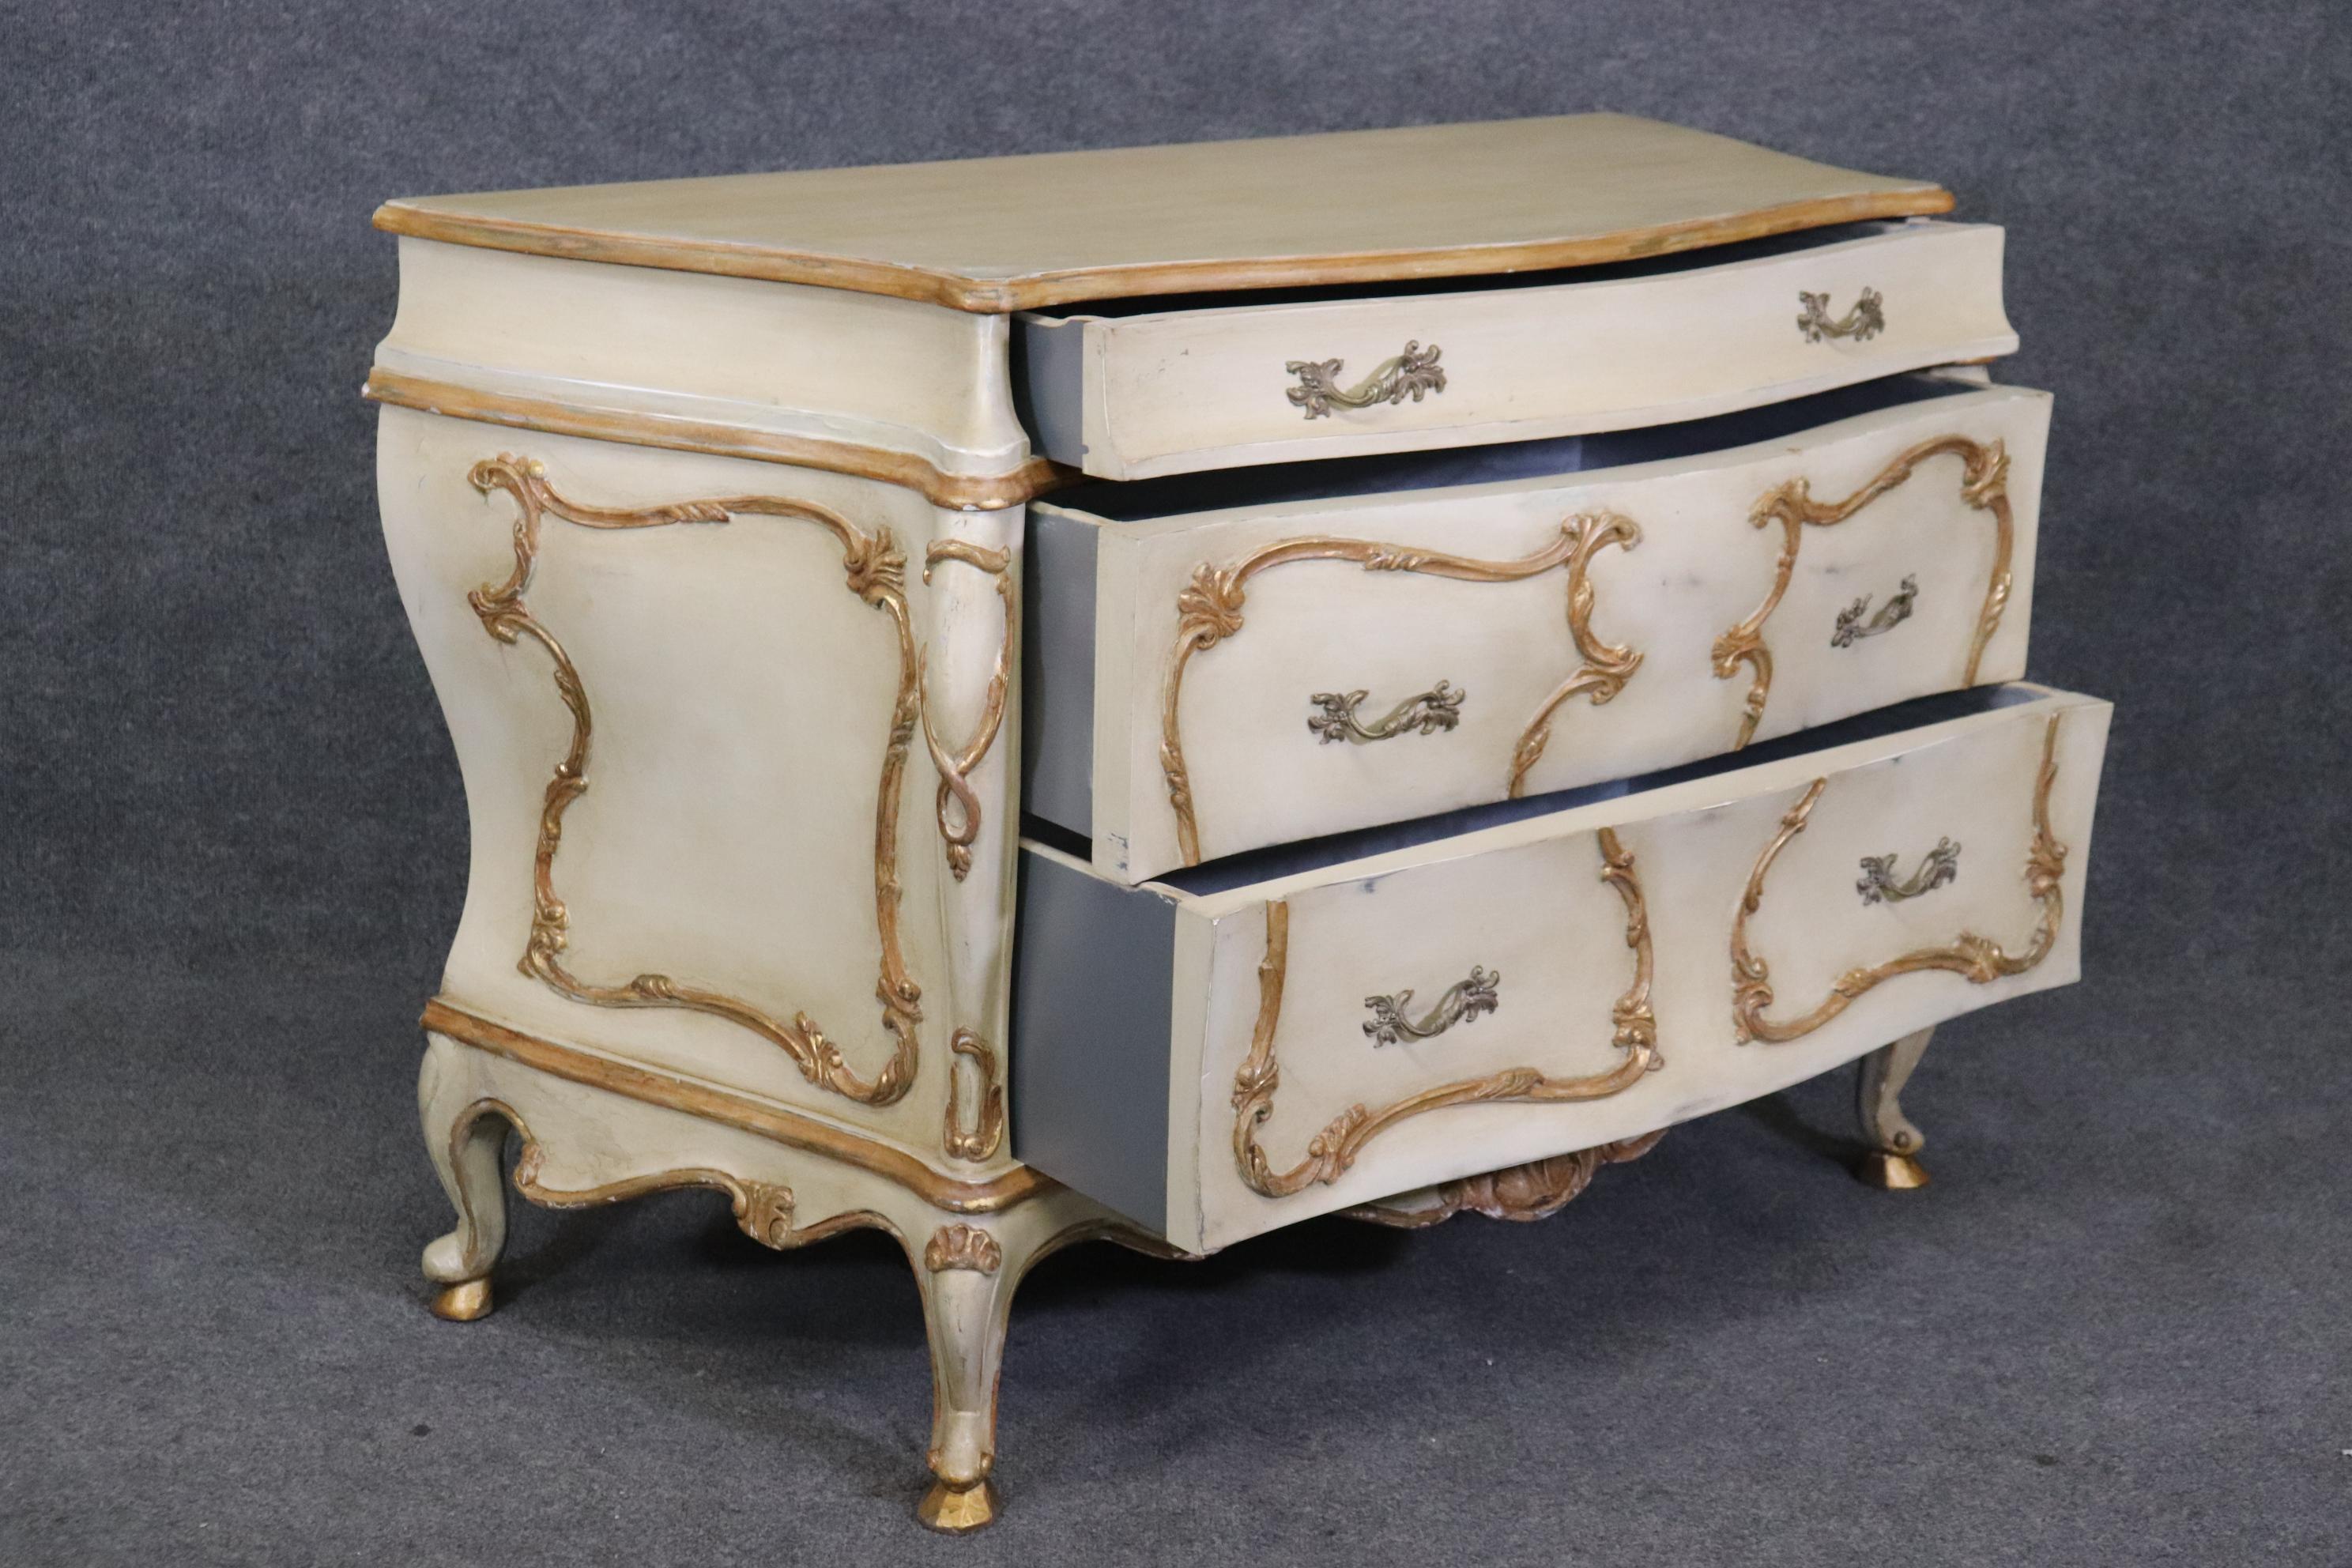 Gorgeous Pair of Antique White and Gold Paint Decorated Commodes 1